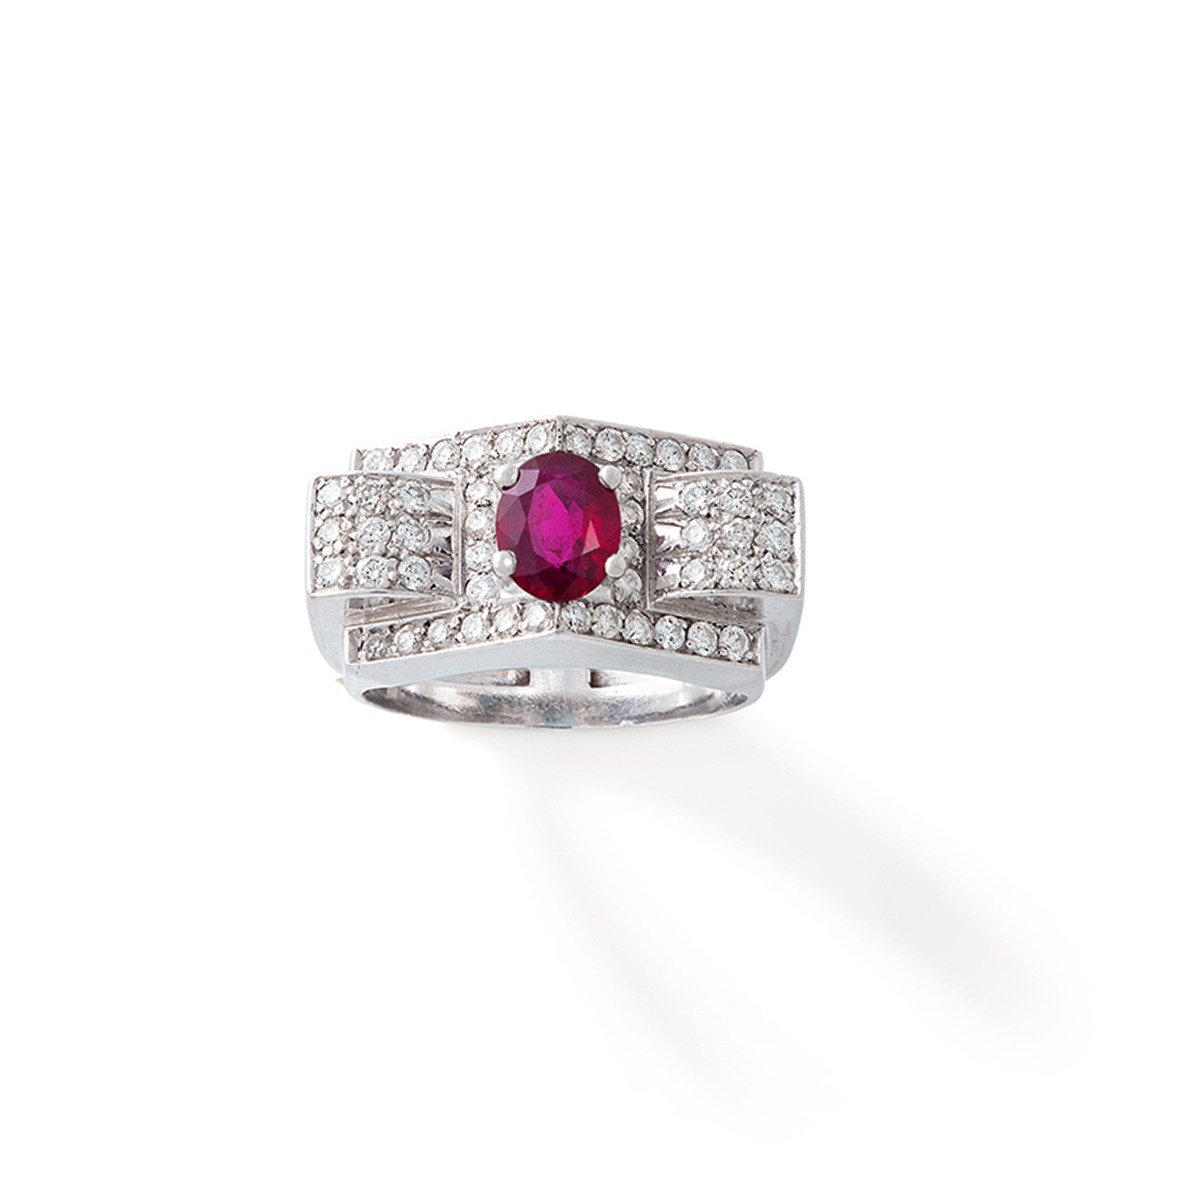 Art Deco Ruby and Diamond Platinum Ring 1930S 1.20 carat Natural Ruby surrounded by Diamond Circa 1930.